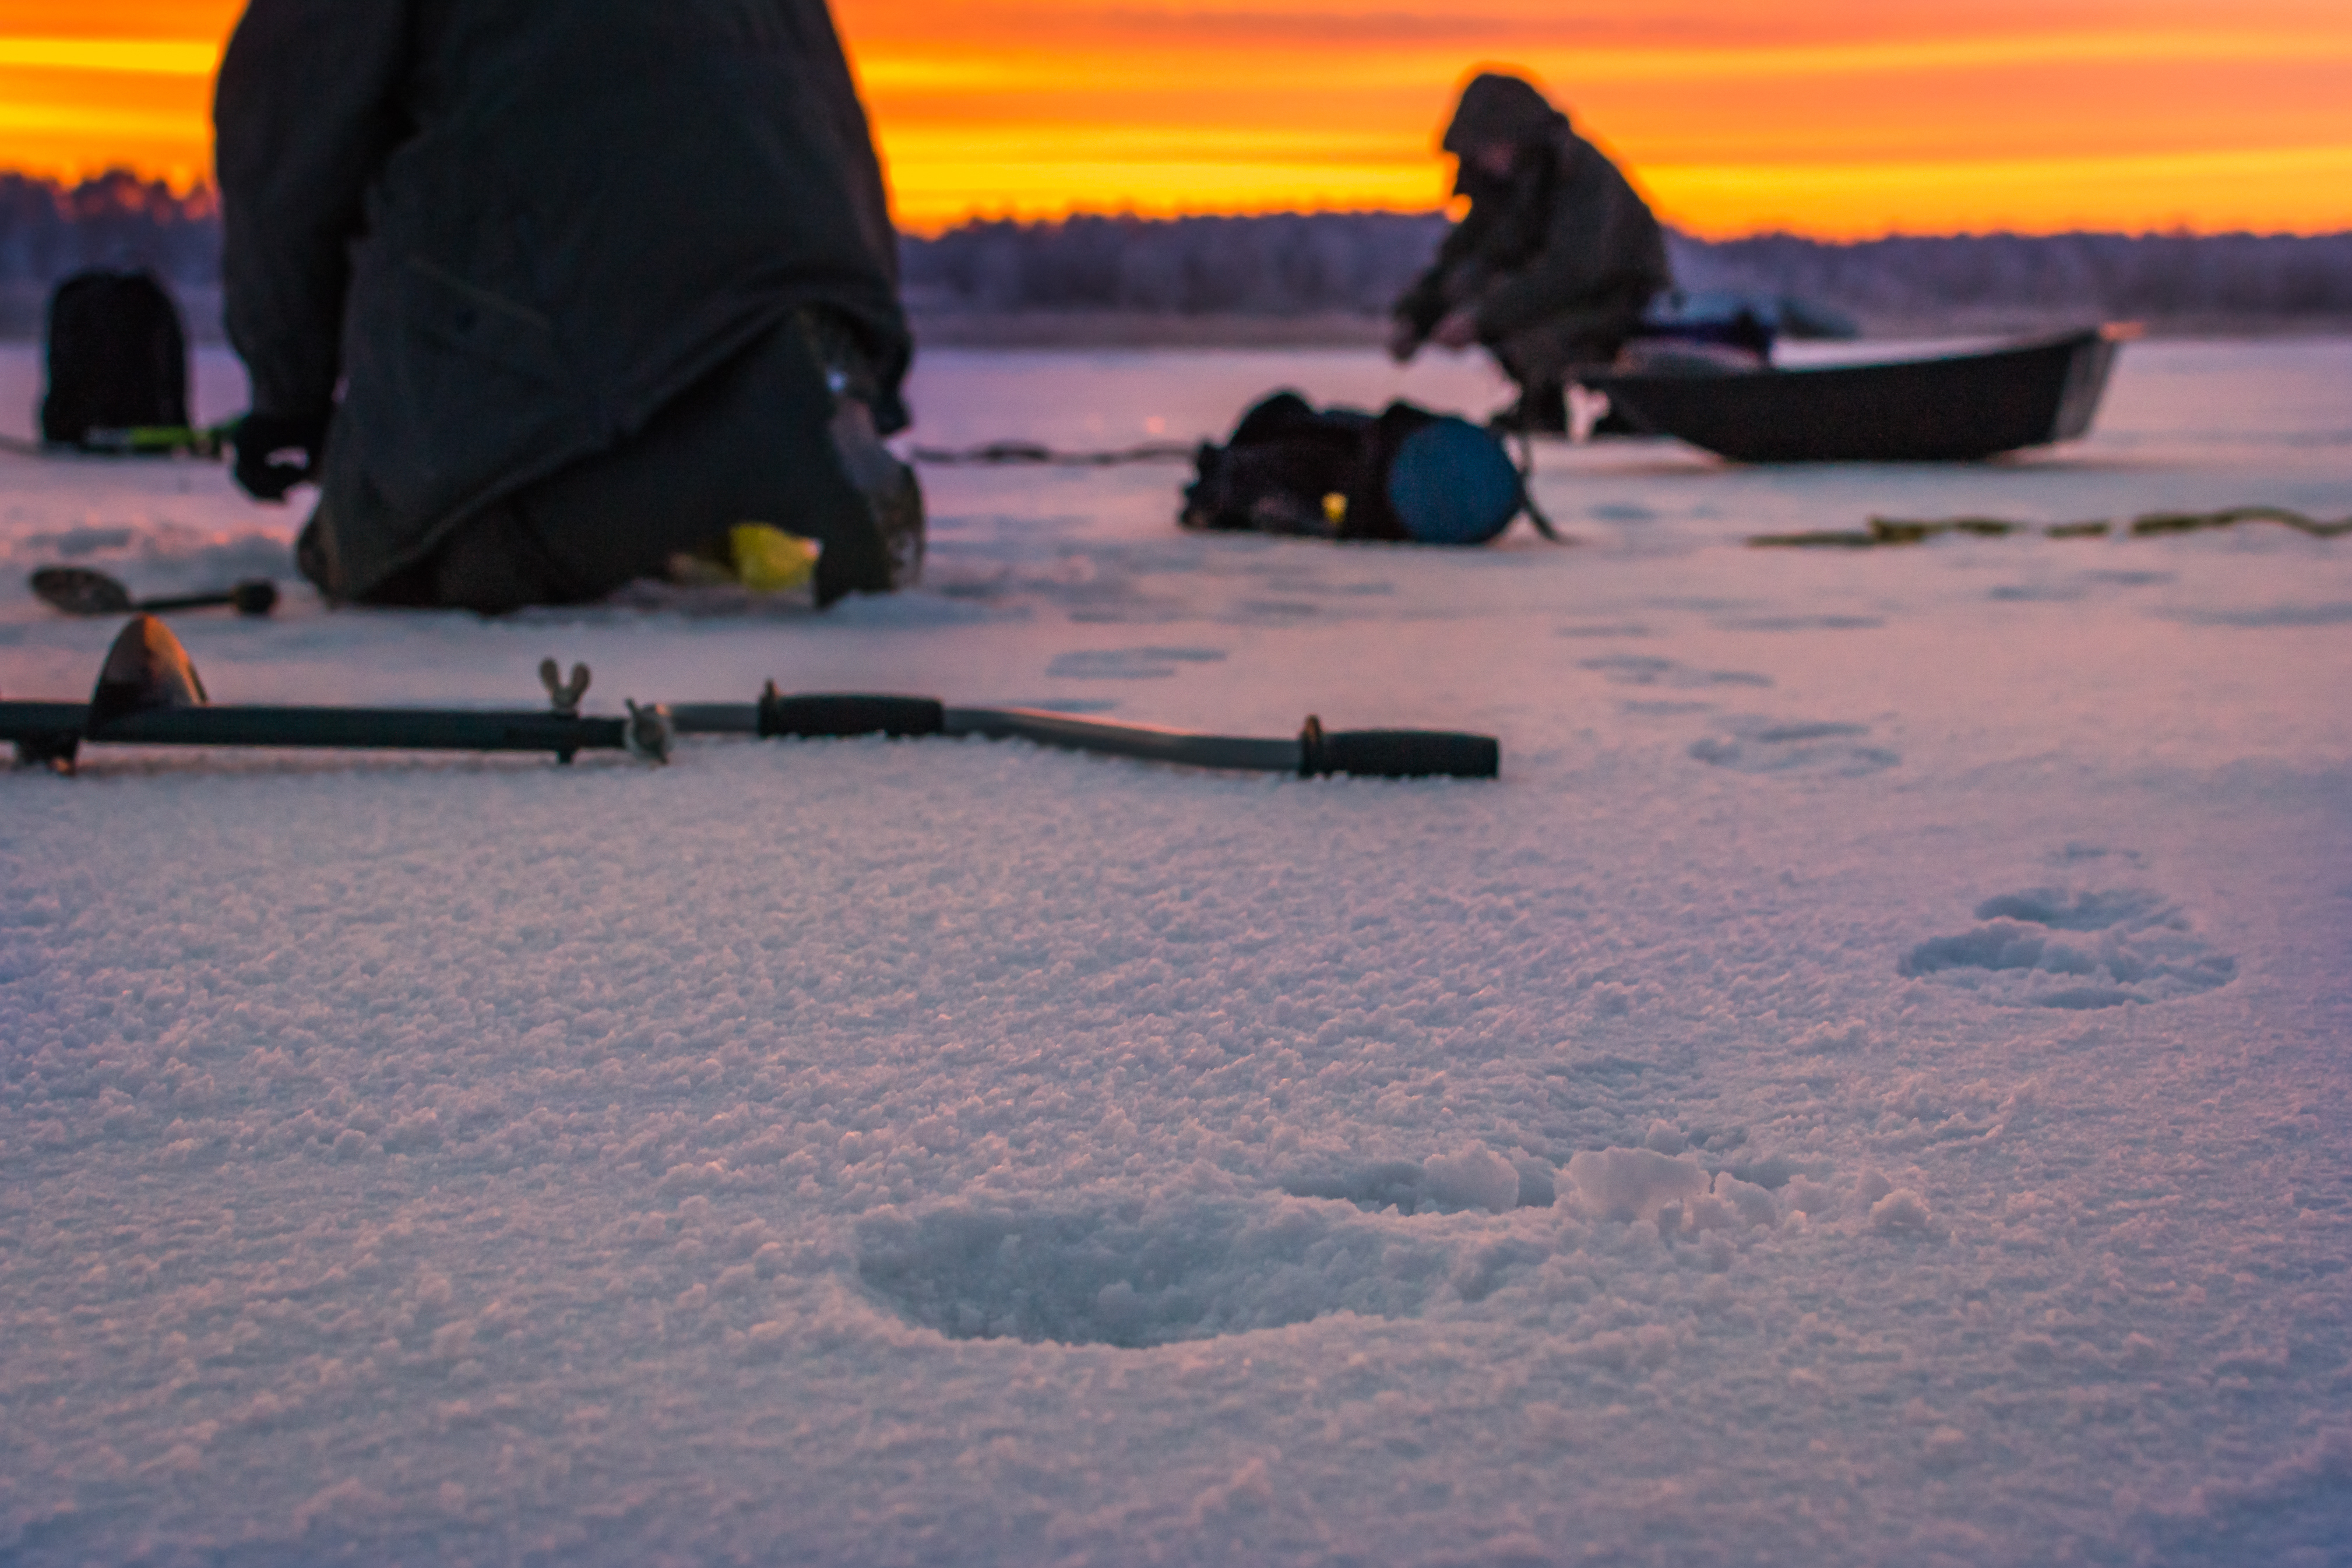 A Complete Guide to Ice Fishing Gear - Wide Open Spaces